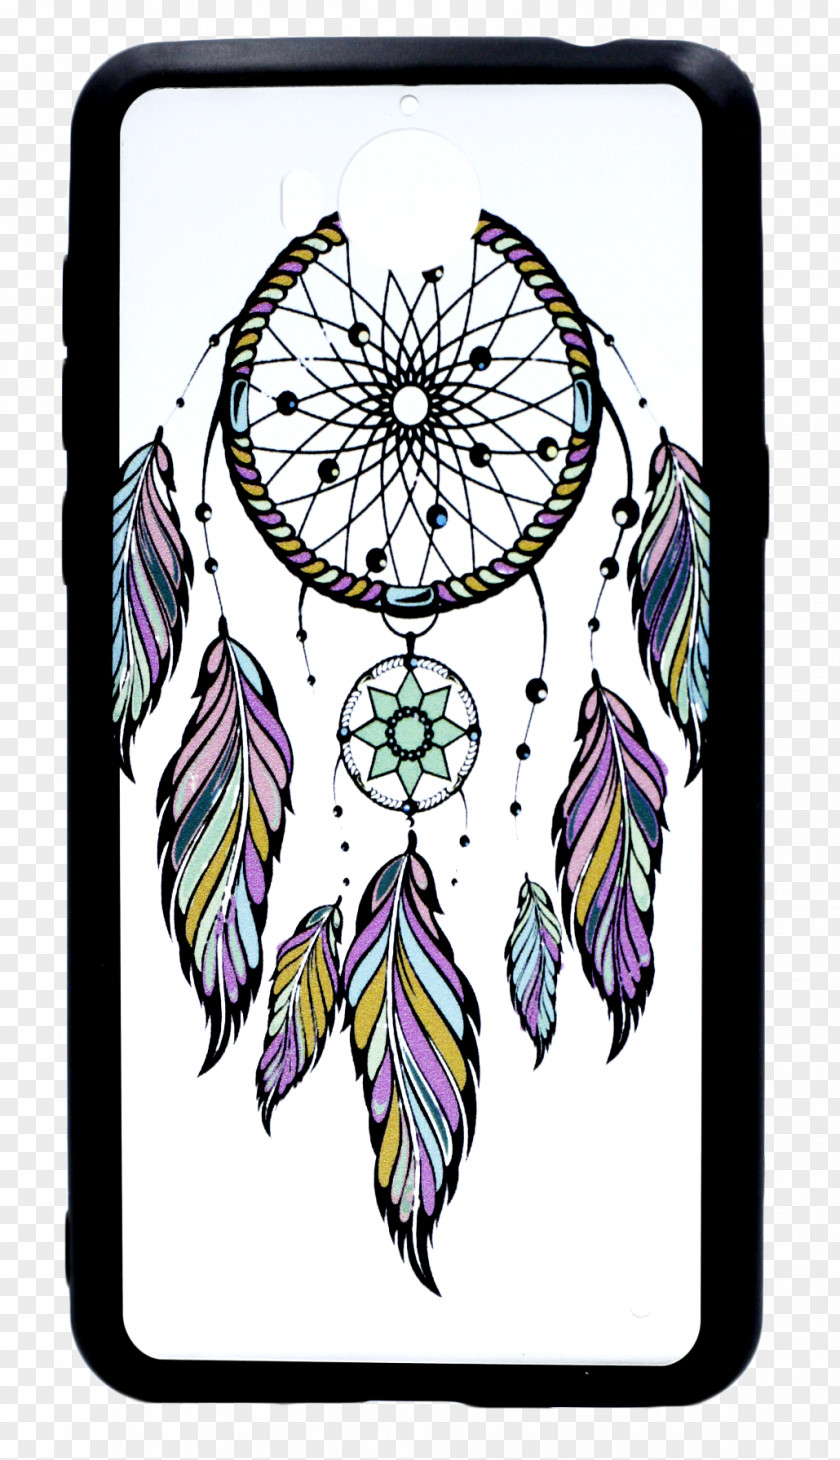 Dreamcatcher Tattoo Drawing PNG